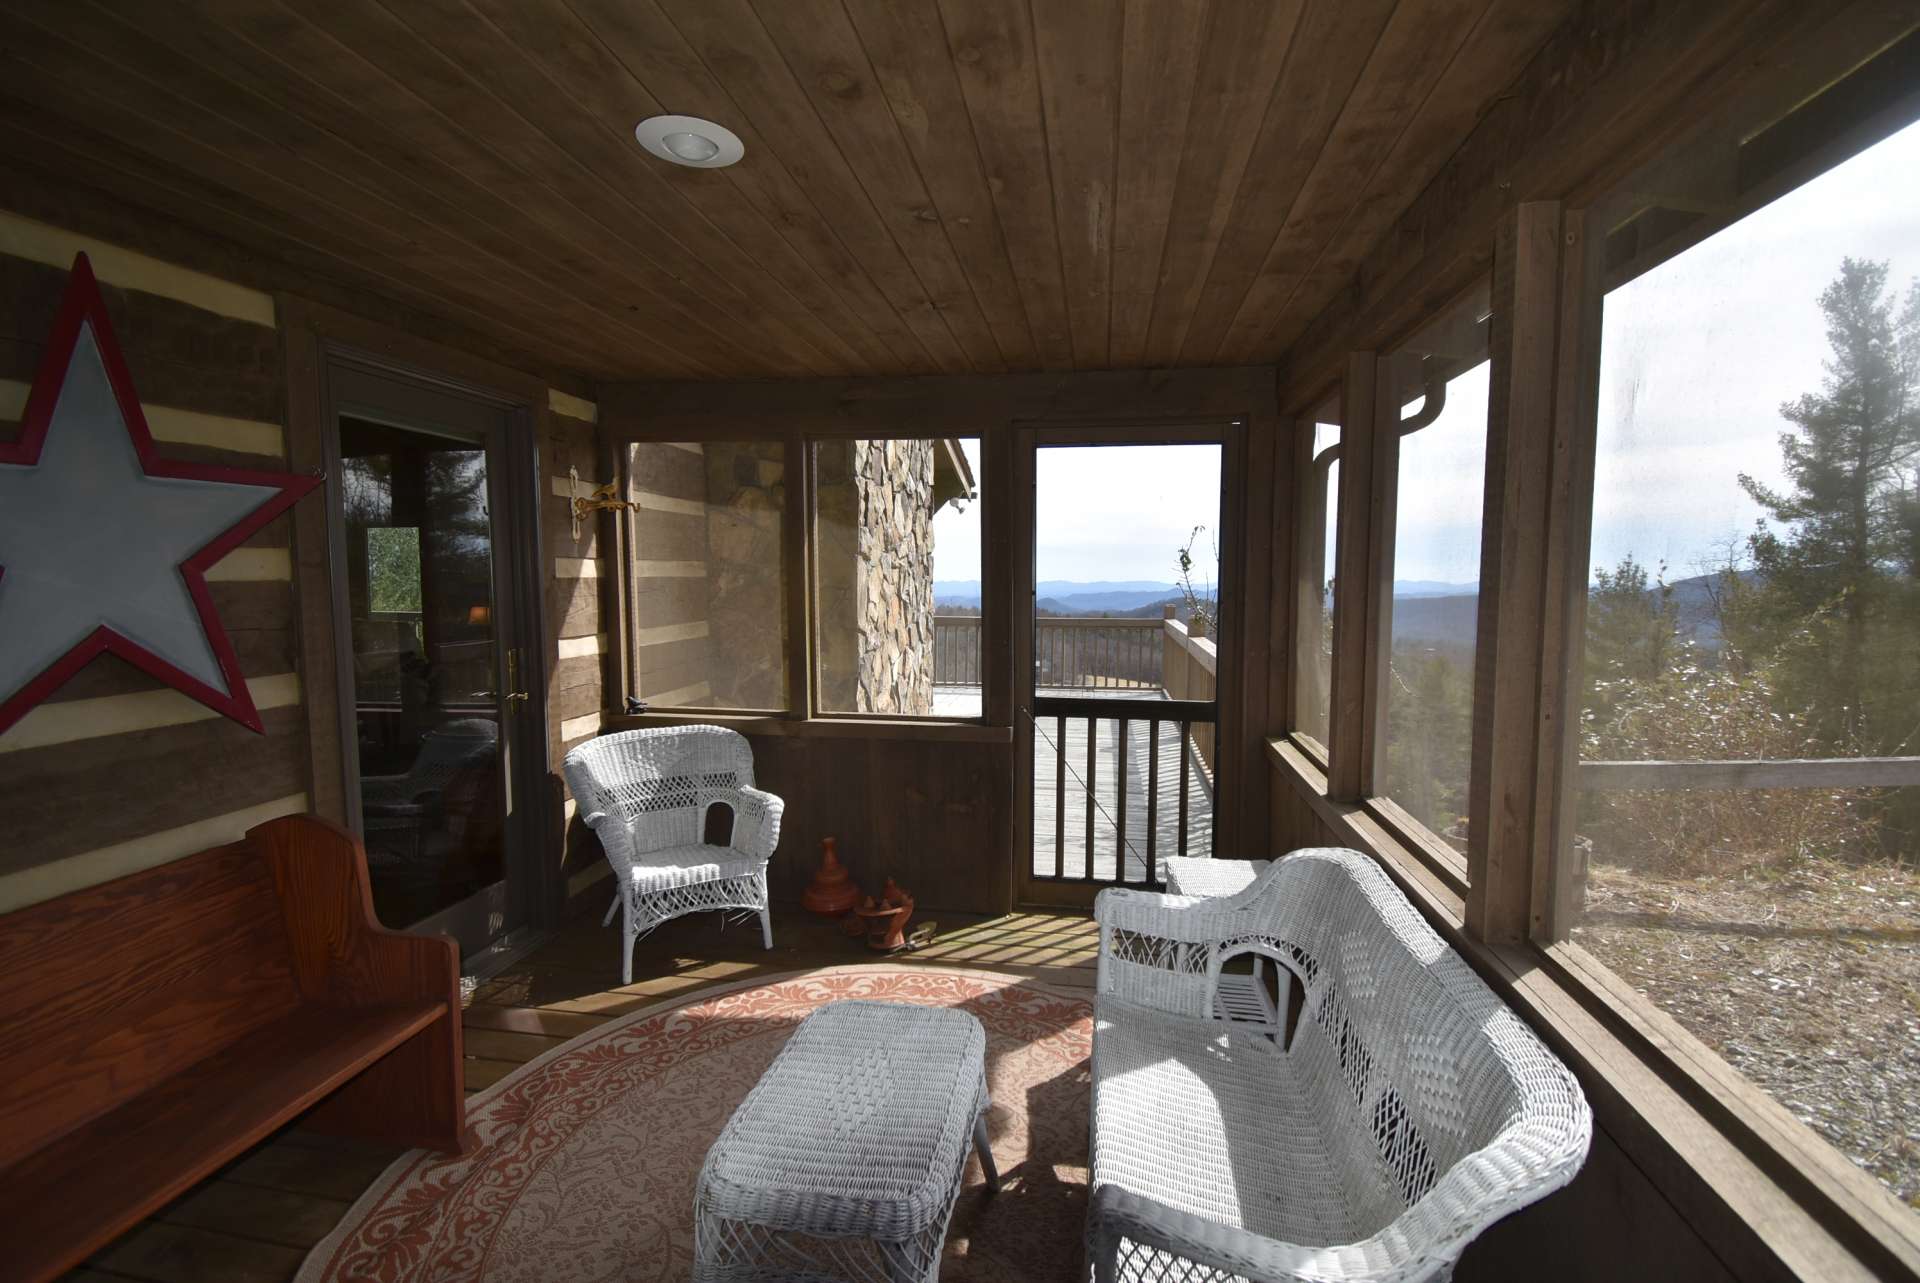 The  kitchen and dining areas open up to the screened porch that opens to the partially covered wrap around deck.